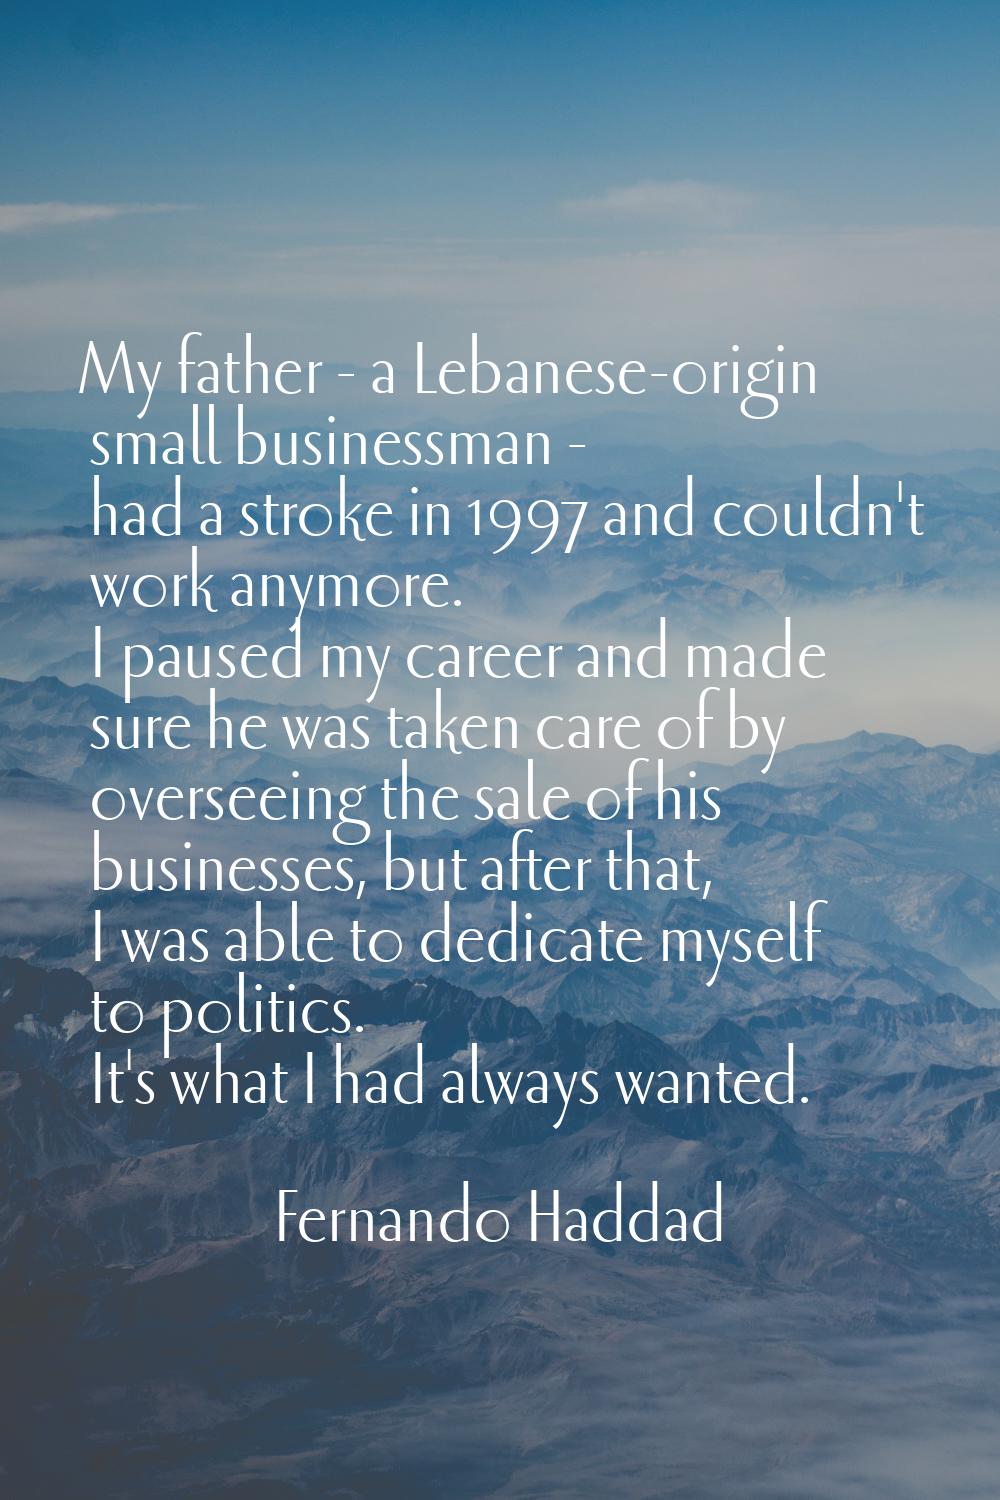 My father - a Lebanese-origin small businessman - had a stroke in 1997 and couldn't work anymore. I